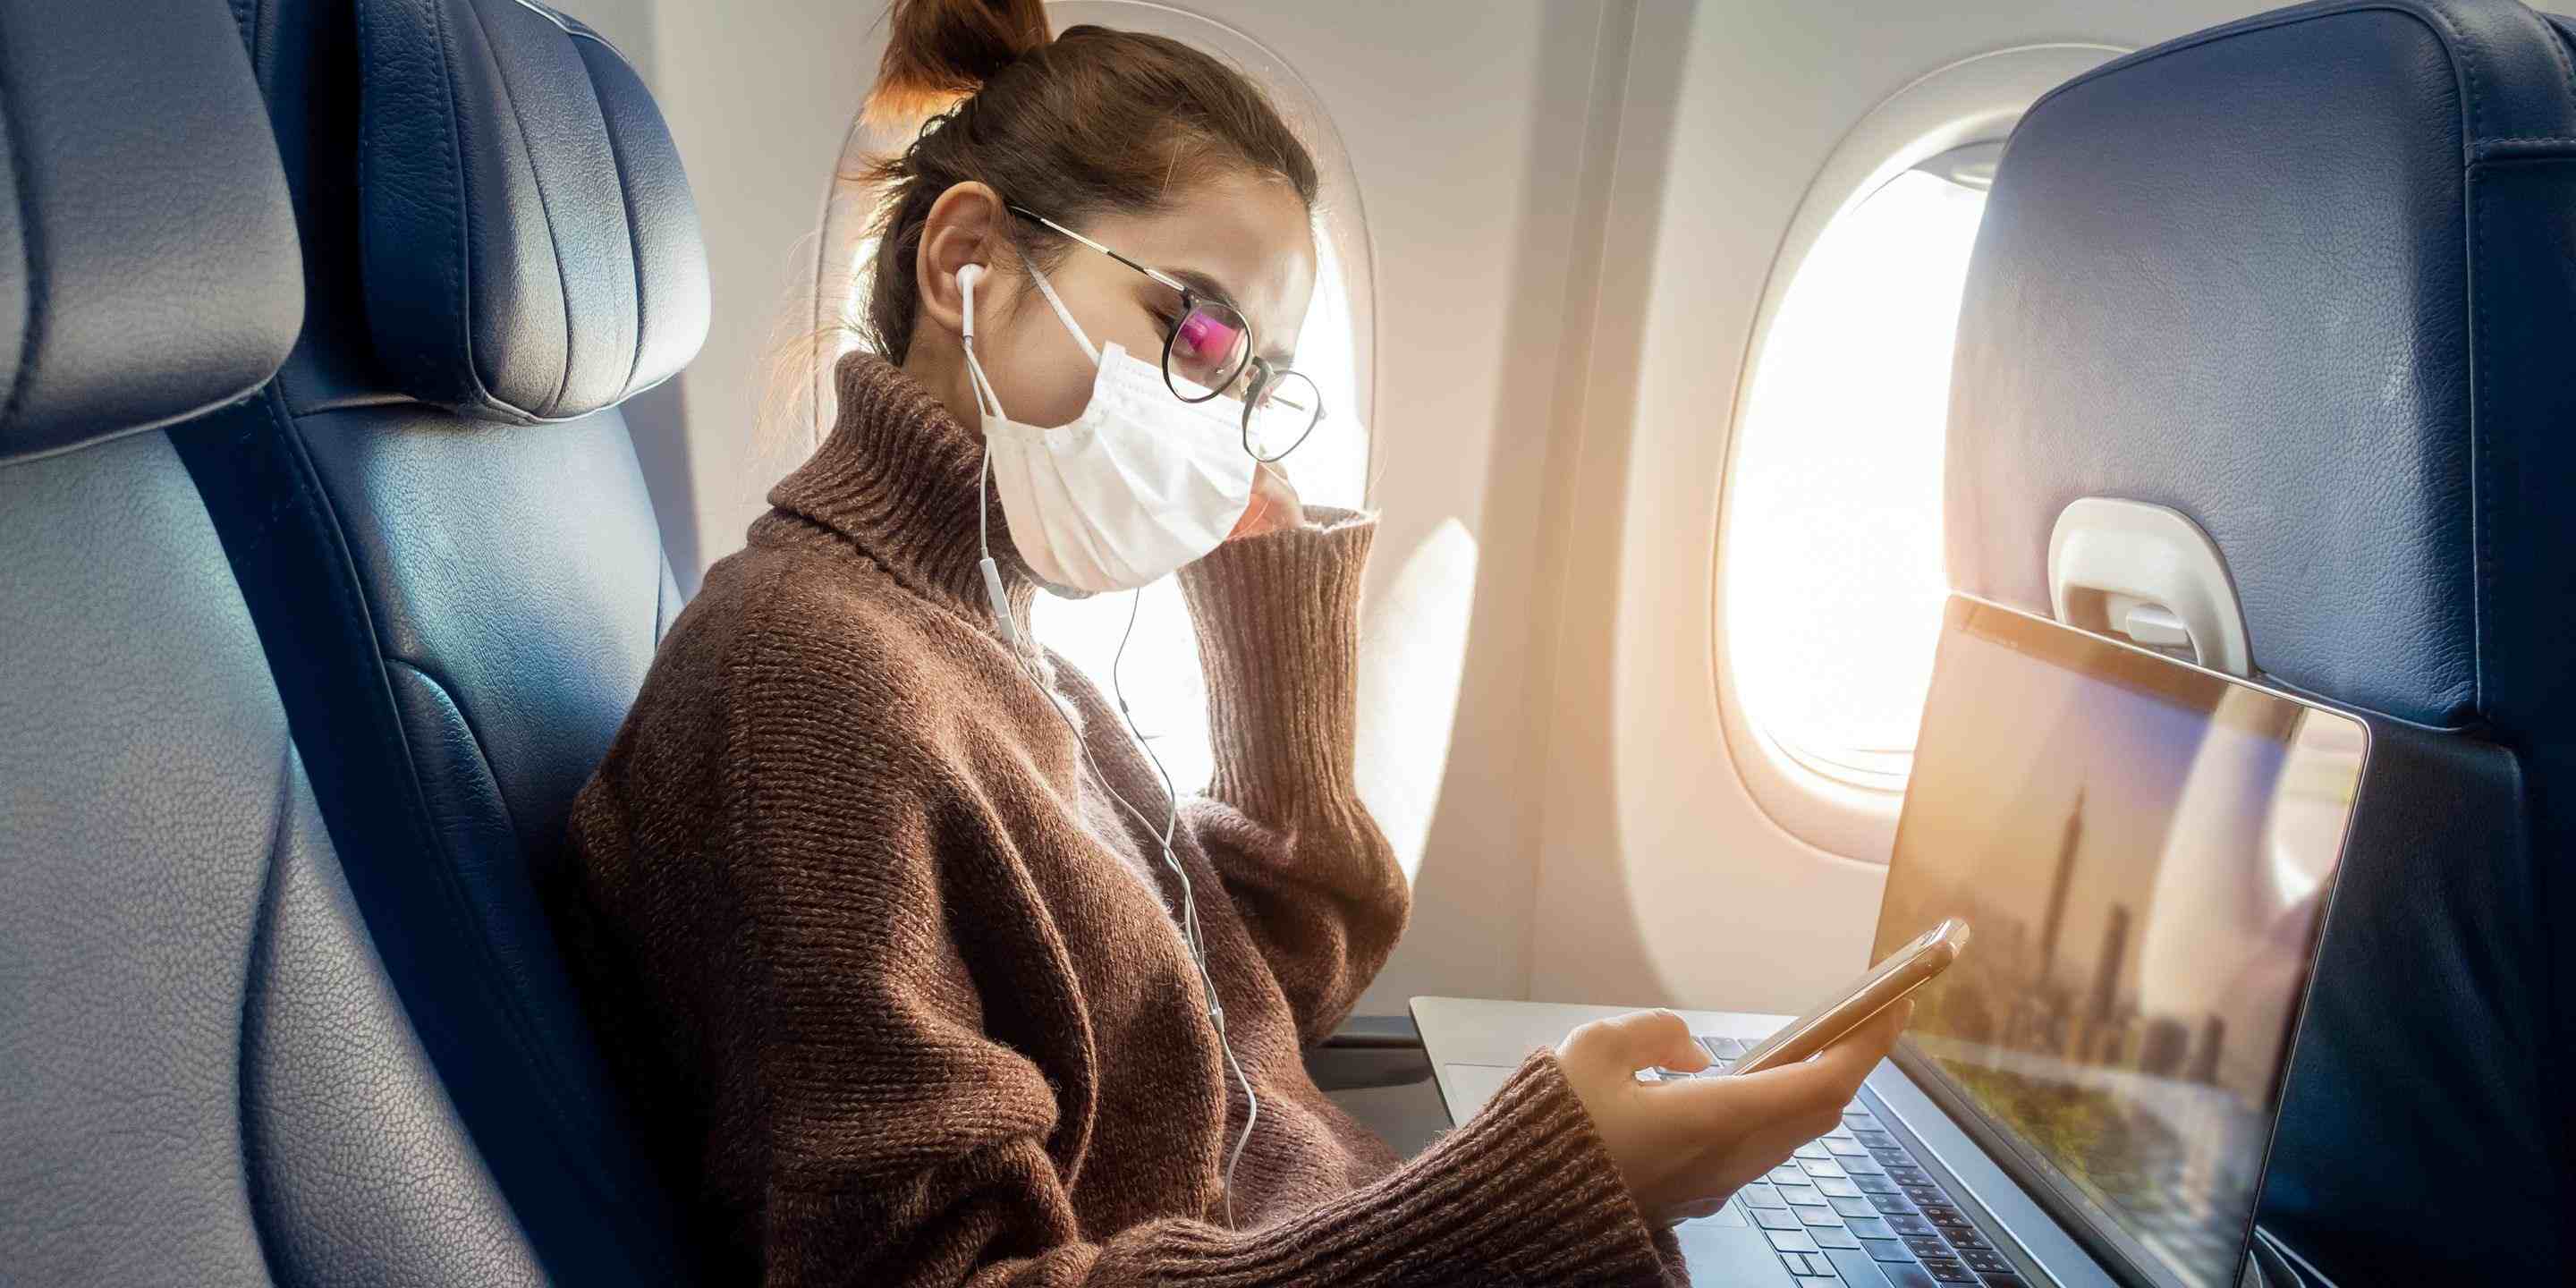 In-Flight Wi-Fi Is Getting More Common, But You Still Need To Be Cautious